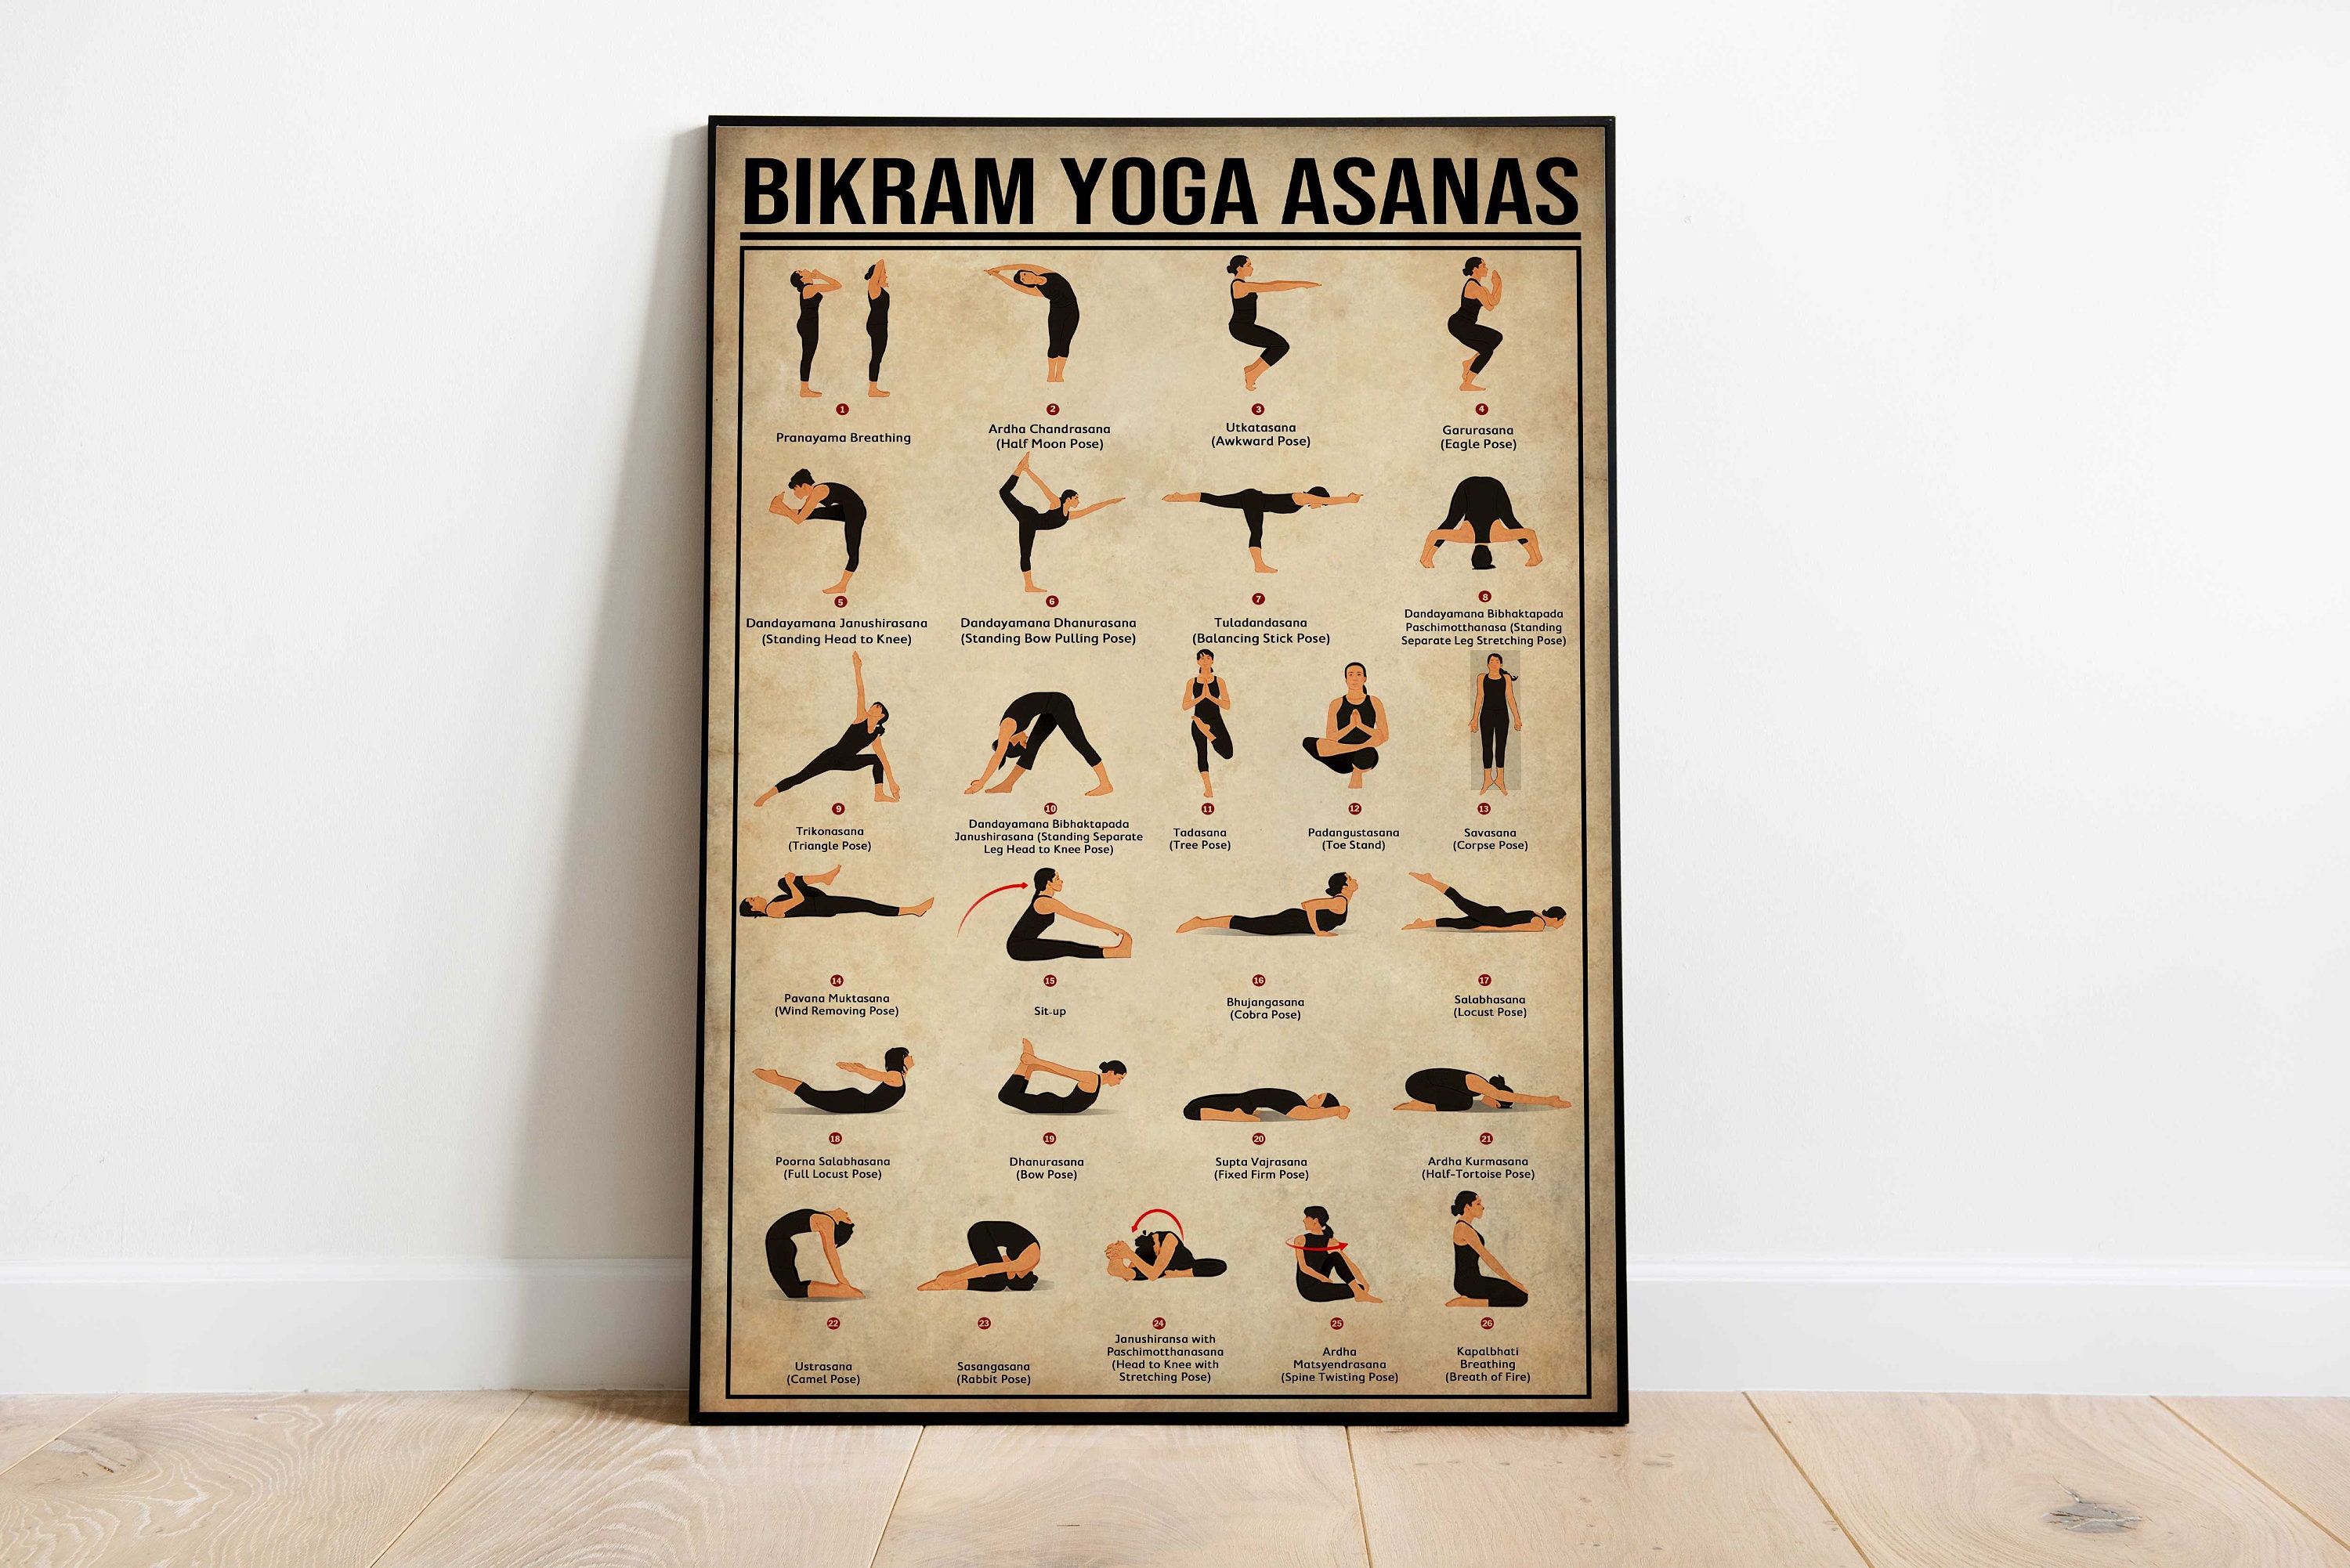 Bikram Yoga: What Is It and What Are the Benefits? – DIYogi.com